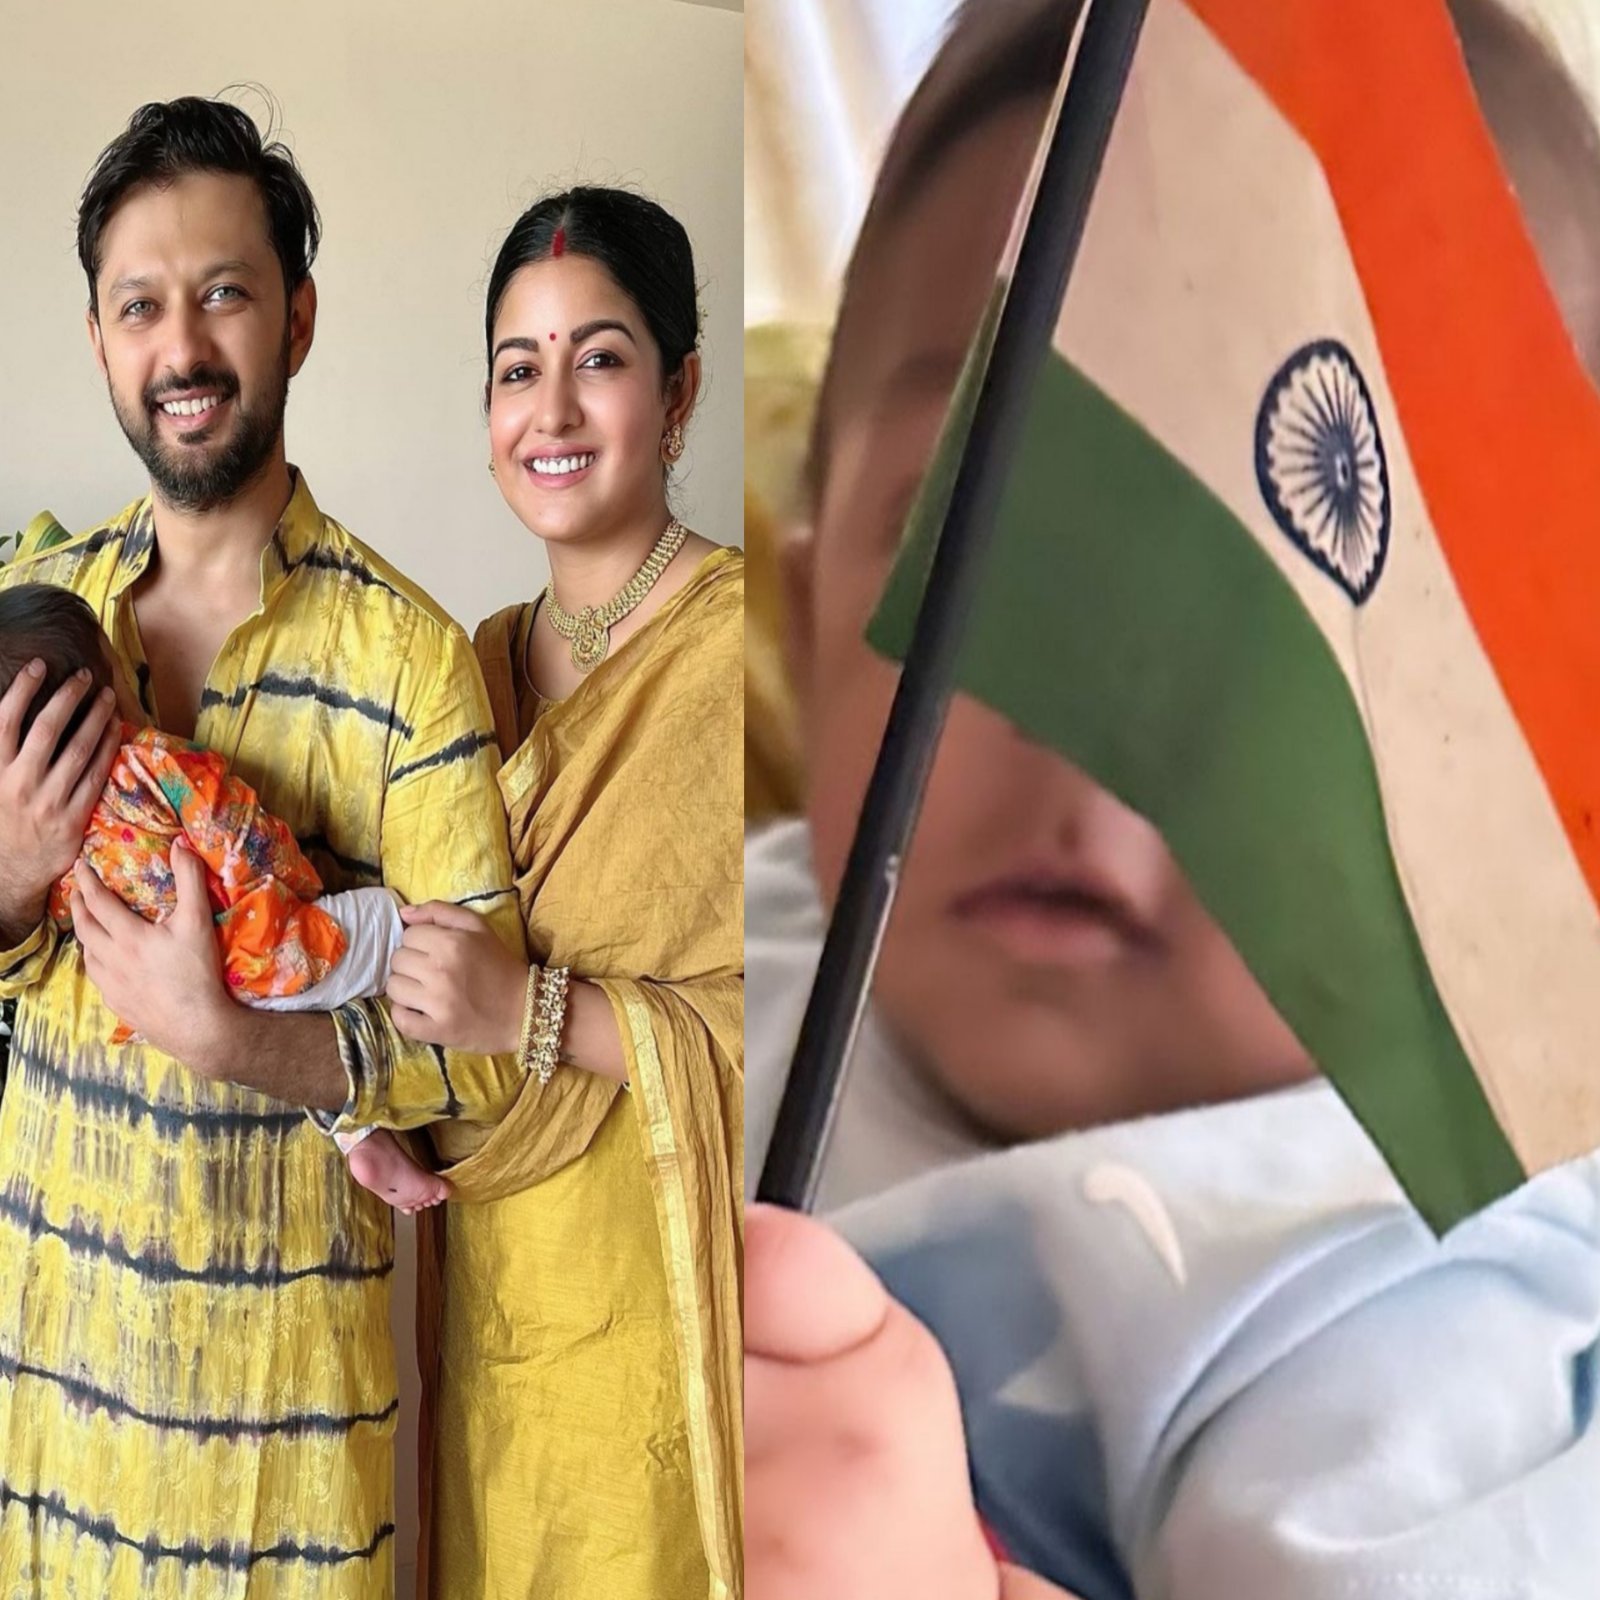 A Picture-Perfect Fan Moment - Ishita and Vatsal’s Little Dynamo, Vaayu, Waves the Flag for Team India